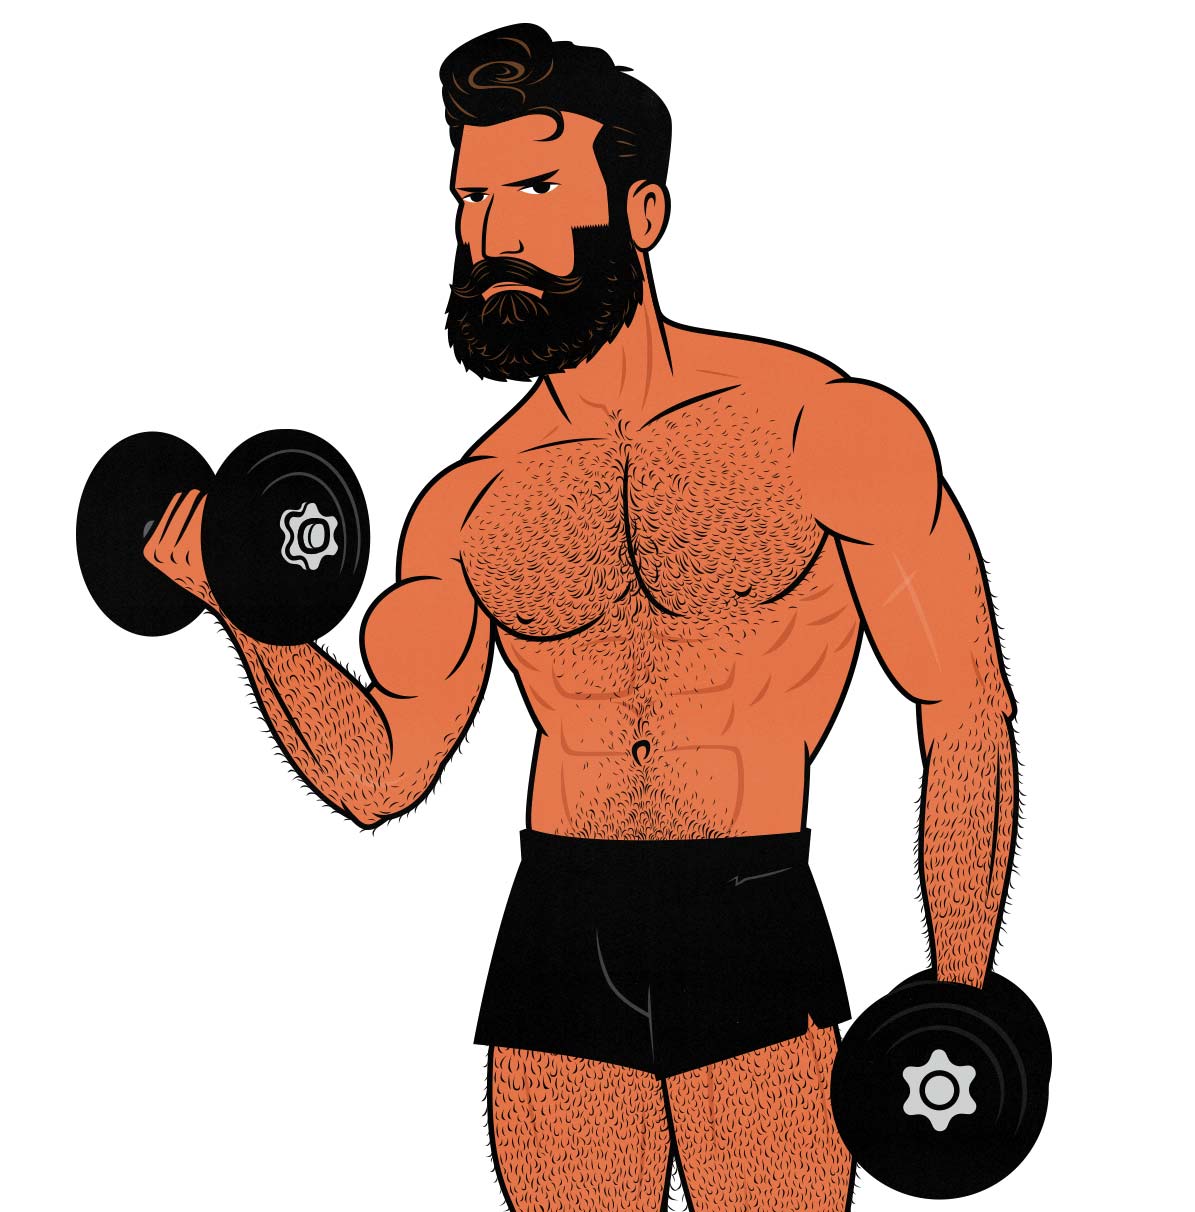 Illustration of a bodybuilder doing a 4-day Bro Split workout routine.